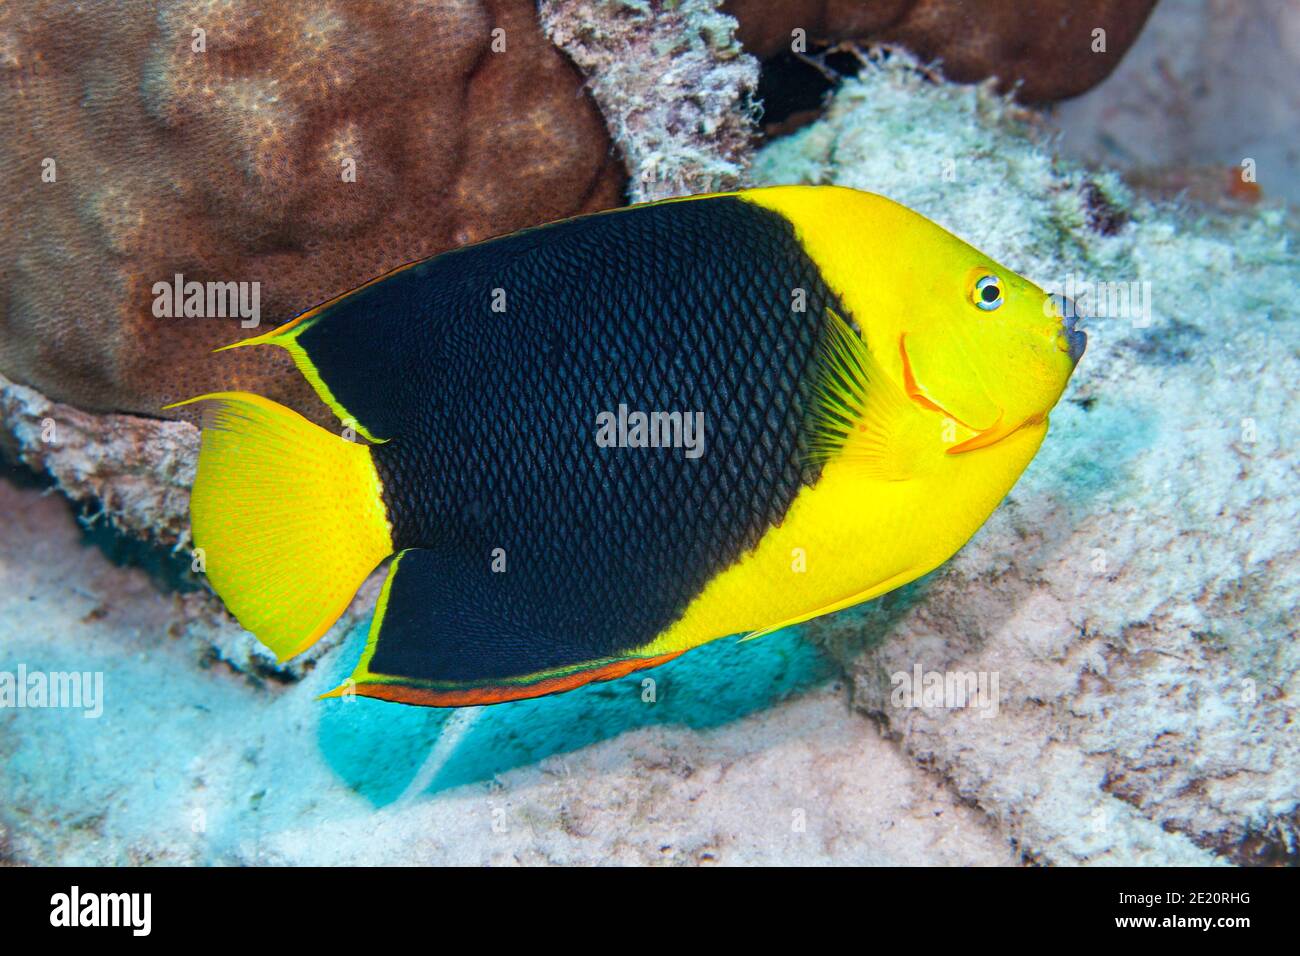 Rock beauty angelfish, Holacanthus tricolor, on coral reef, Bonaire island, Lesser Antilles, former Netherlands Antilles, Caribbean. Stock Photo